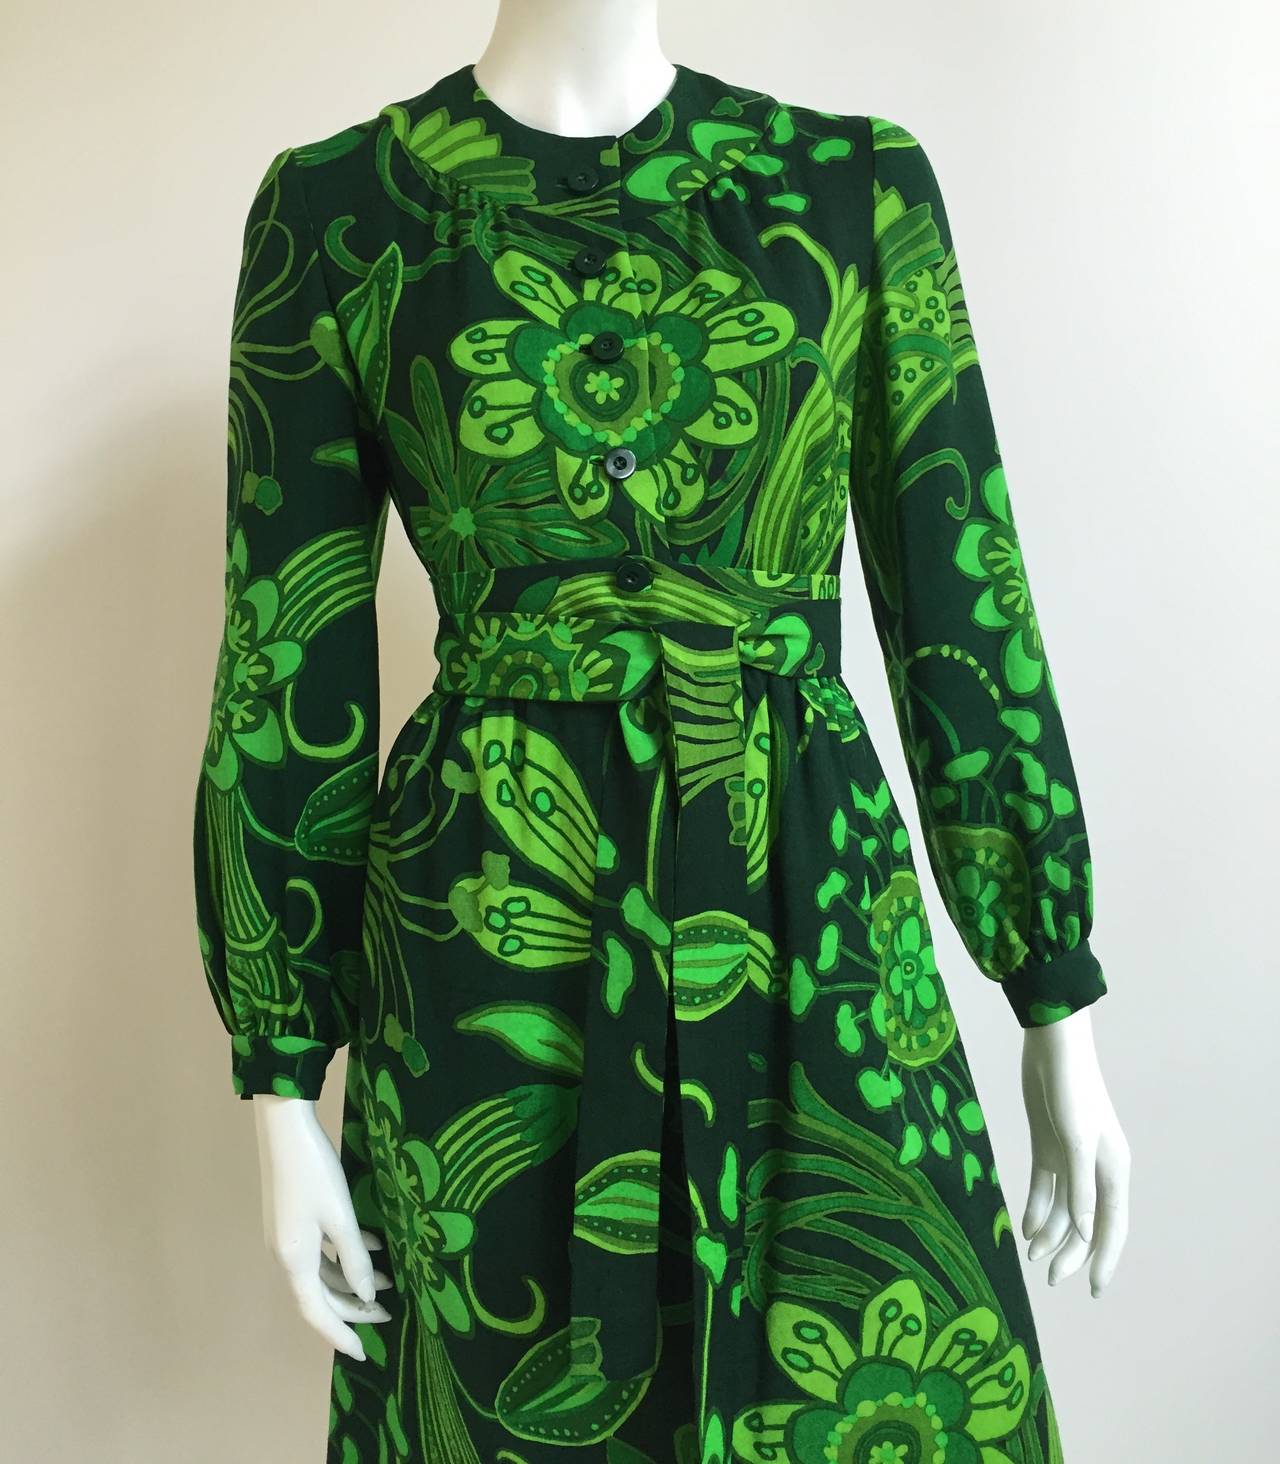 Chester Weinberg 1960s flower dress with belt. Original vintage size is 12 but fits like a modern size 6 today (please see and use measurements). Dress has pockets and is completely lined inside.
Measurements are : 
37